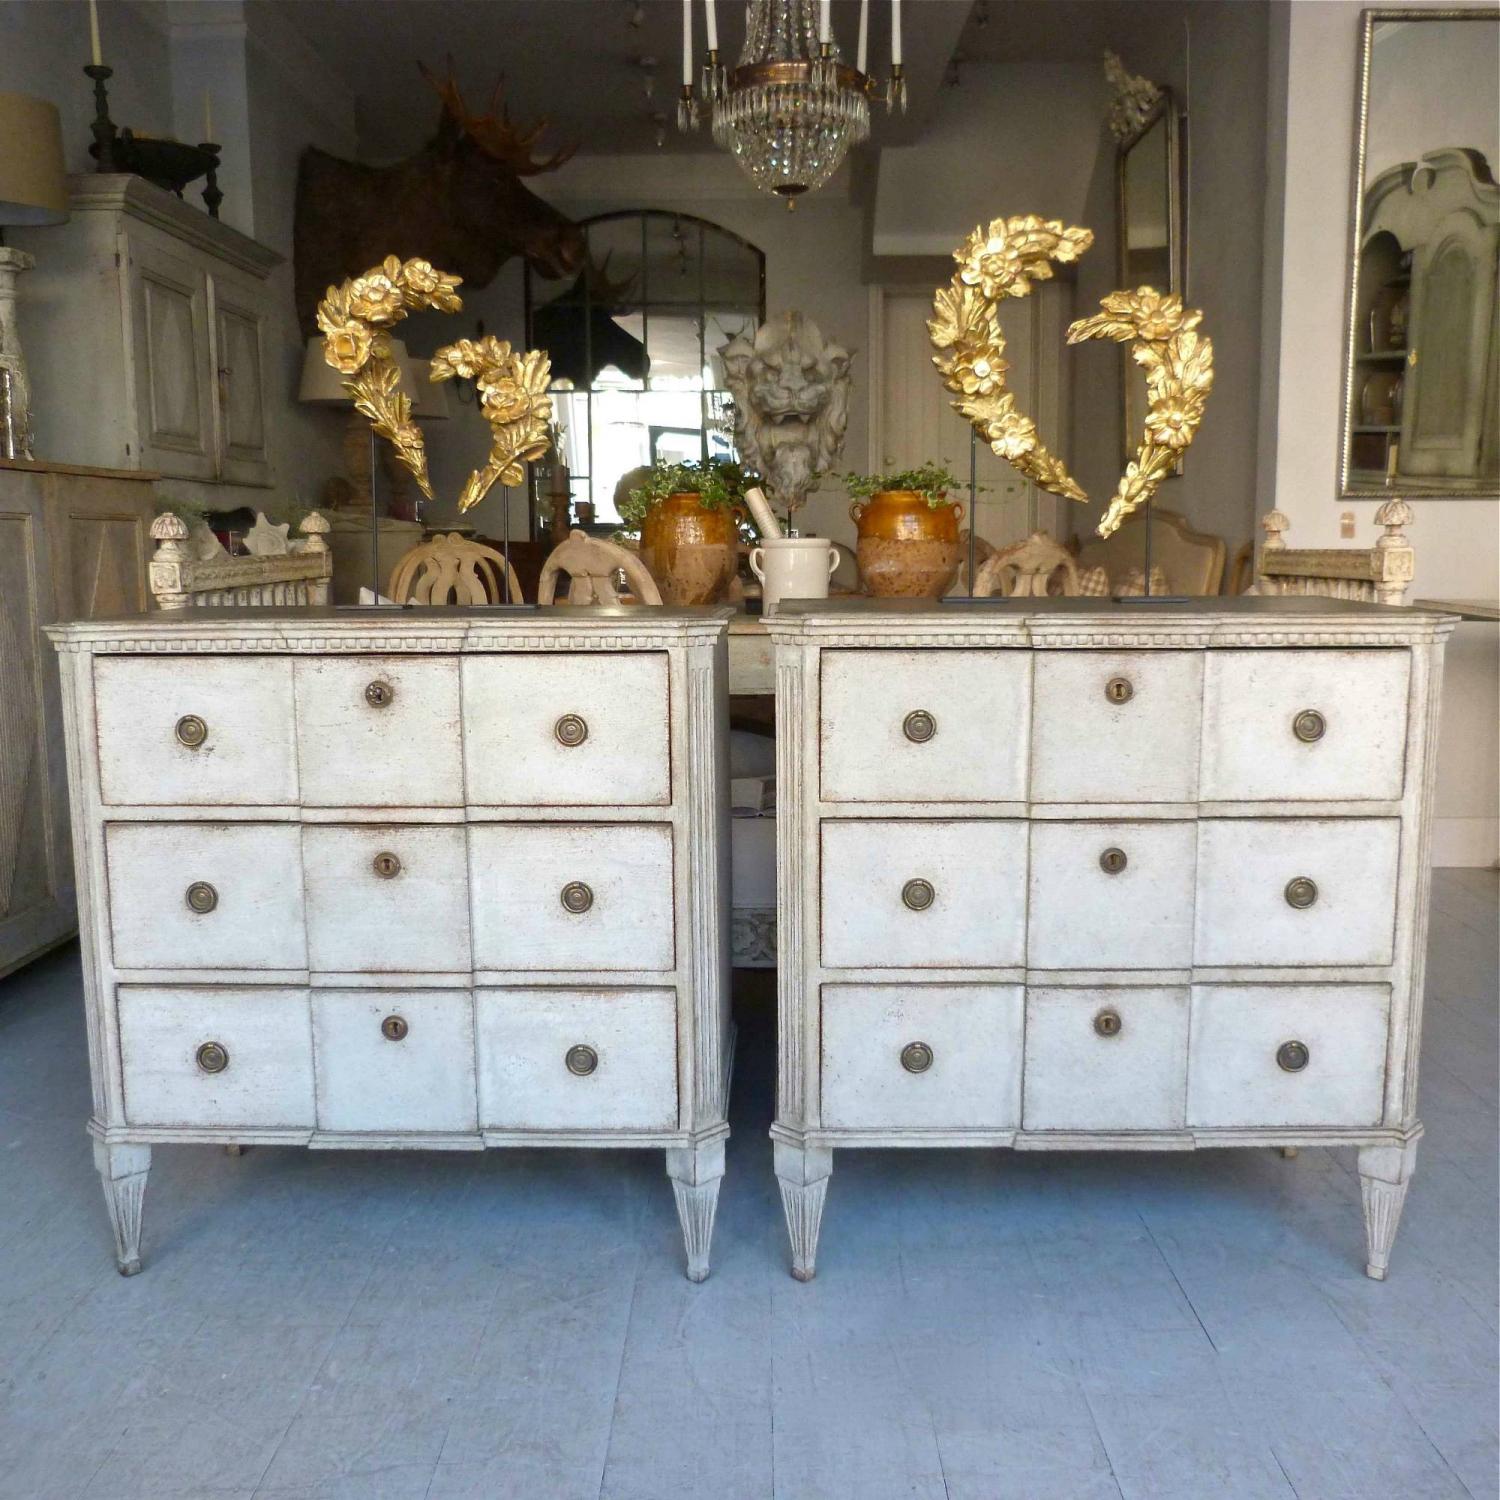 PAIR OF SWEDISH GUSTAVIAN STYLE BEDSIDE CHESTS